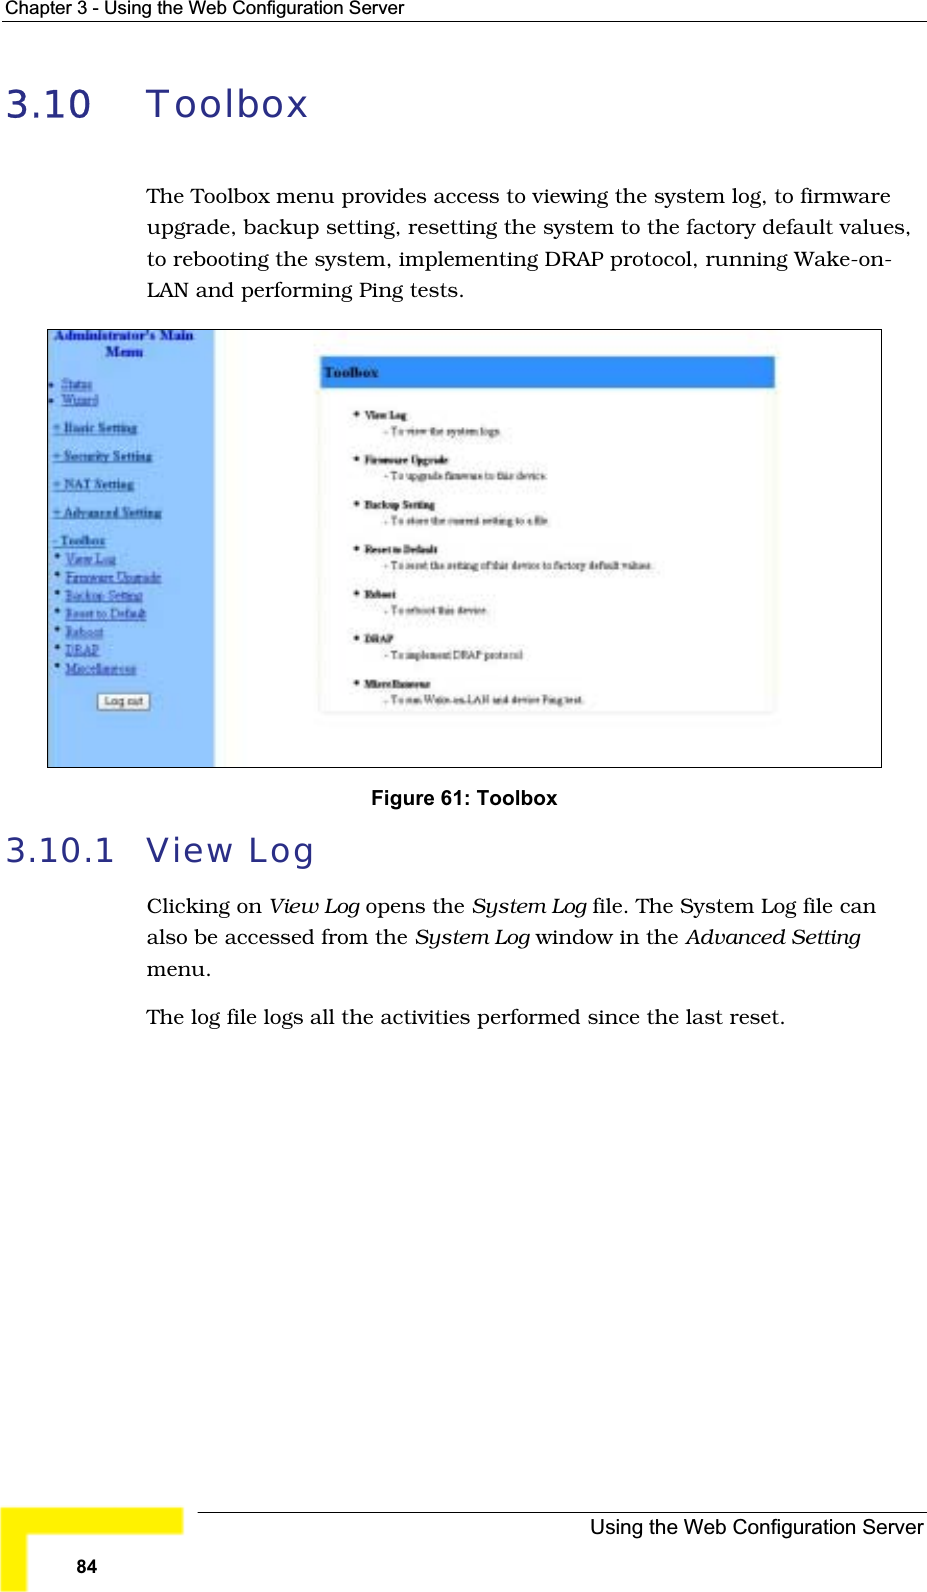 Chapter 3 - Using the Web Configuration Server3.10 ToolboxThe Toolbox menu provides access to viewing the system log, to firmwareupgrade, backup setting, resetting the system to the factory default values, to rebooting the system, implementing DRAP protocol, running Wake-on-LAN and performing Ping tests.Figure 61: Toolbox 3.10.1 View LogClicking on View Log opens the System Log file. The System Log file can also be accessed from the System Log window in the Advanced Settingmenu.The log file logs all the activities performed since the last reset.Using the Web Configuration Server84